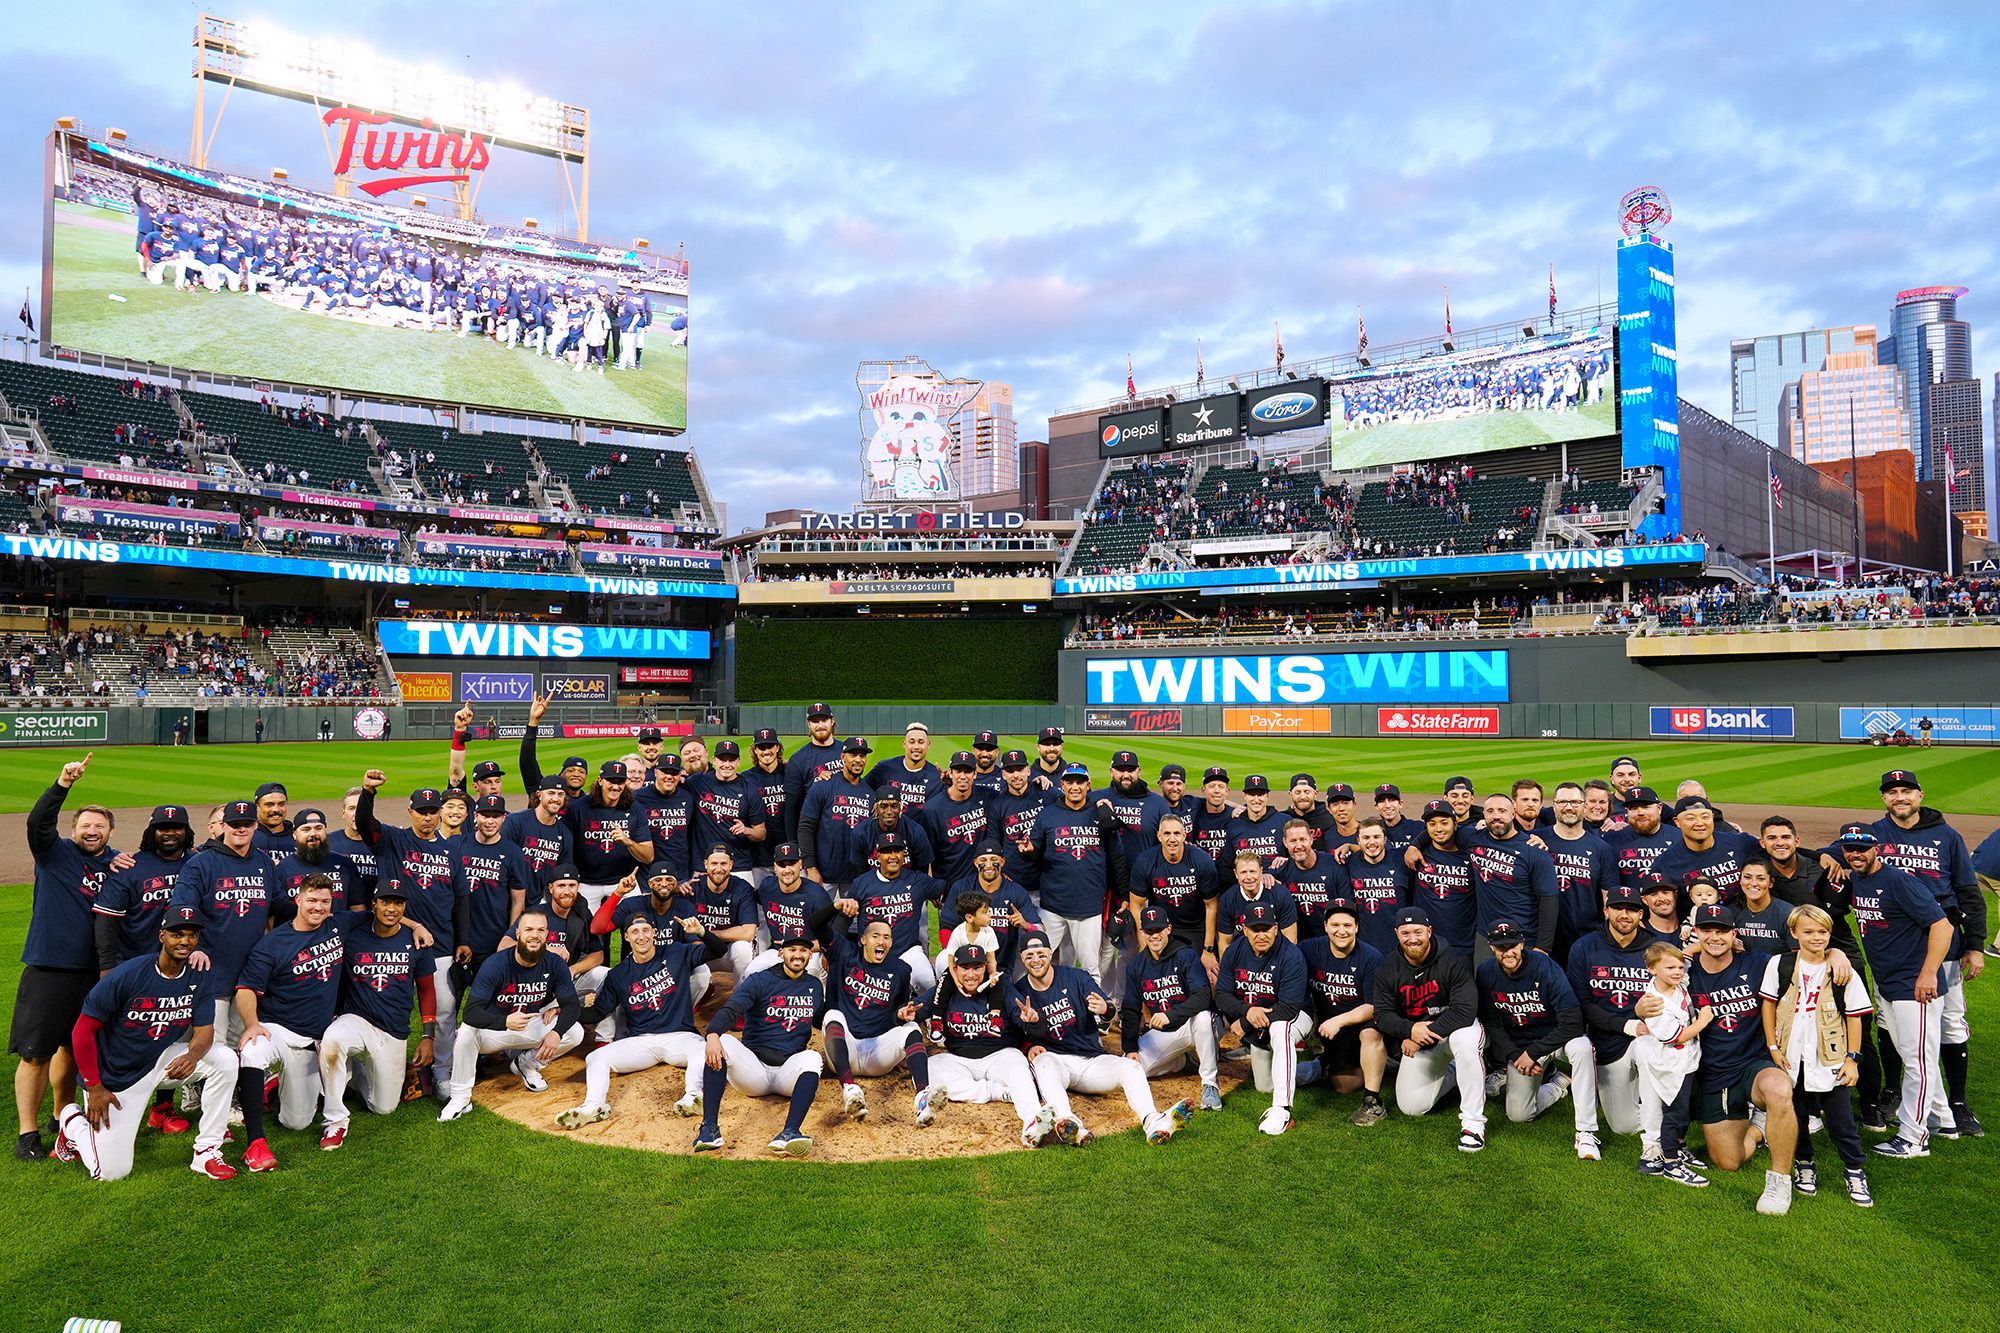 What's happening at Target Field during the MLB Wild Card Series